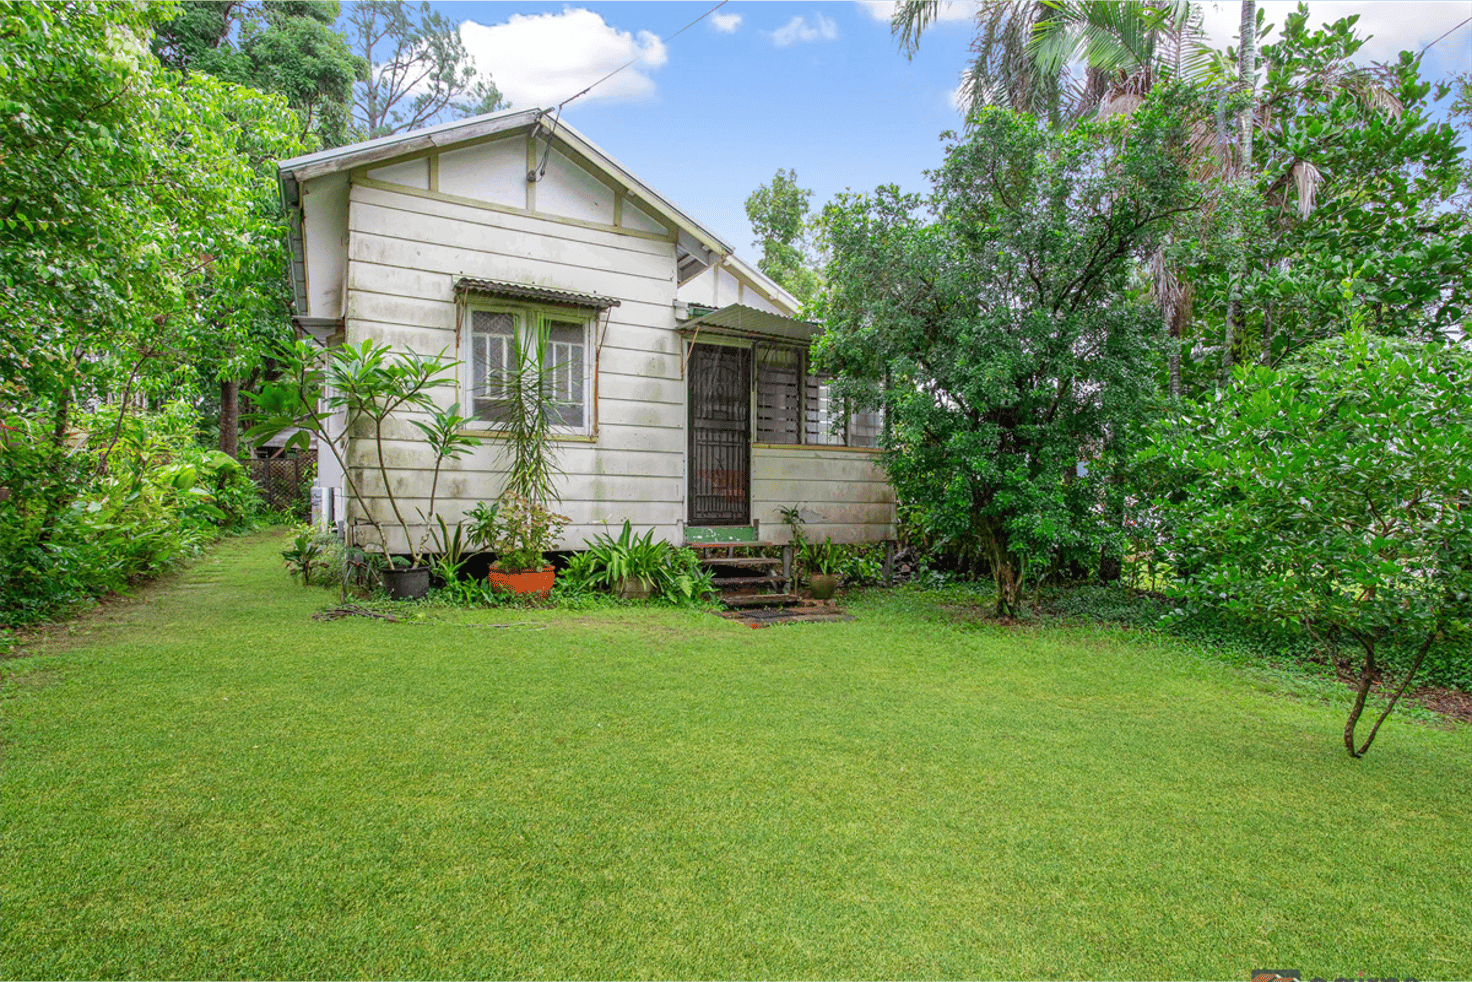 Main view of Homely house listing, 180 Martyn Street, Manunda QLD 4870